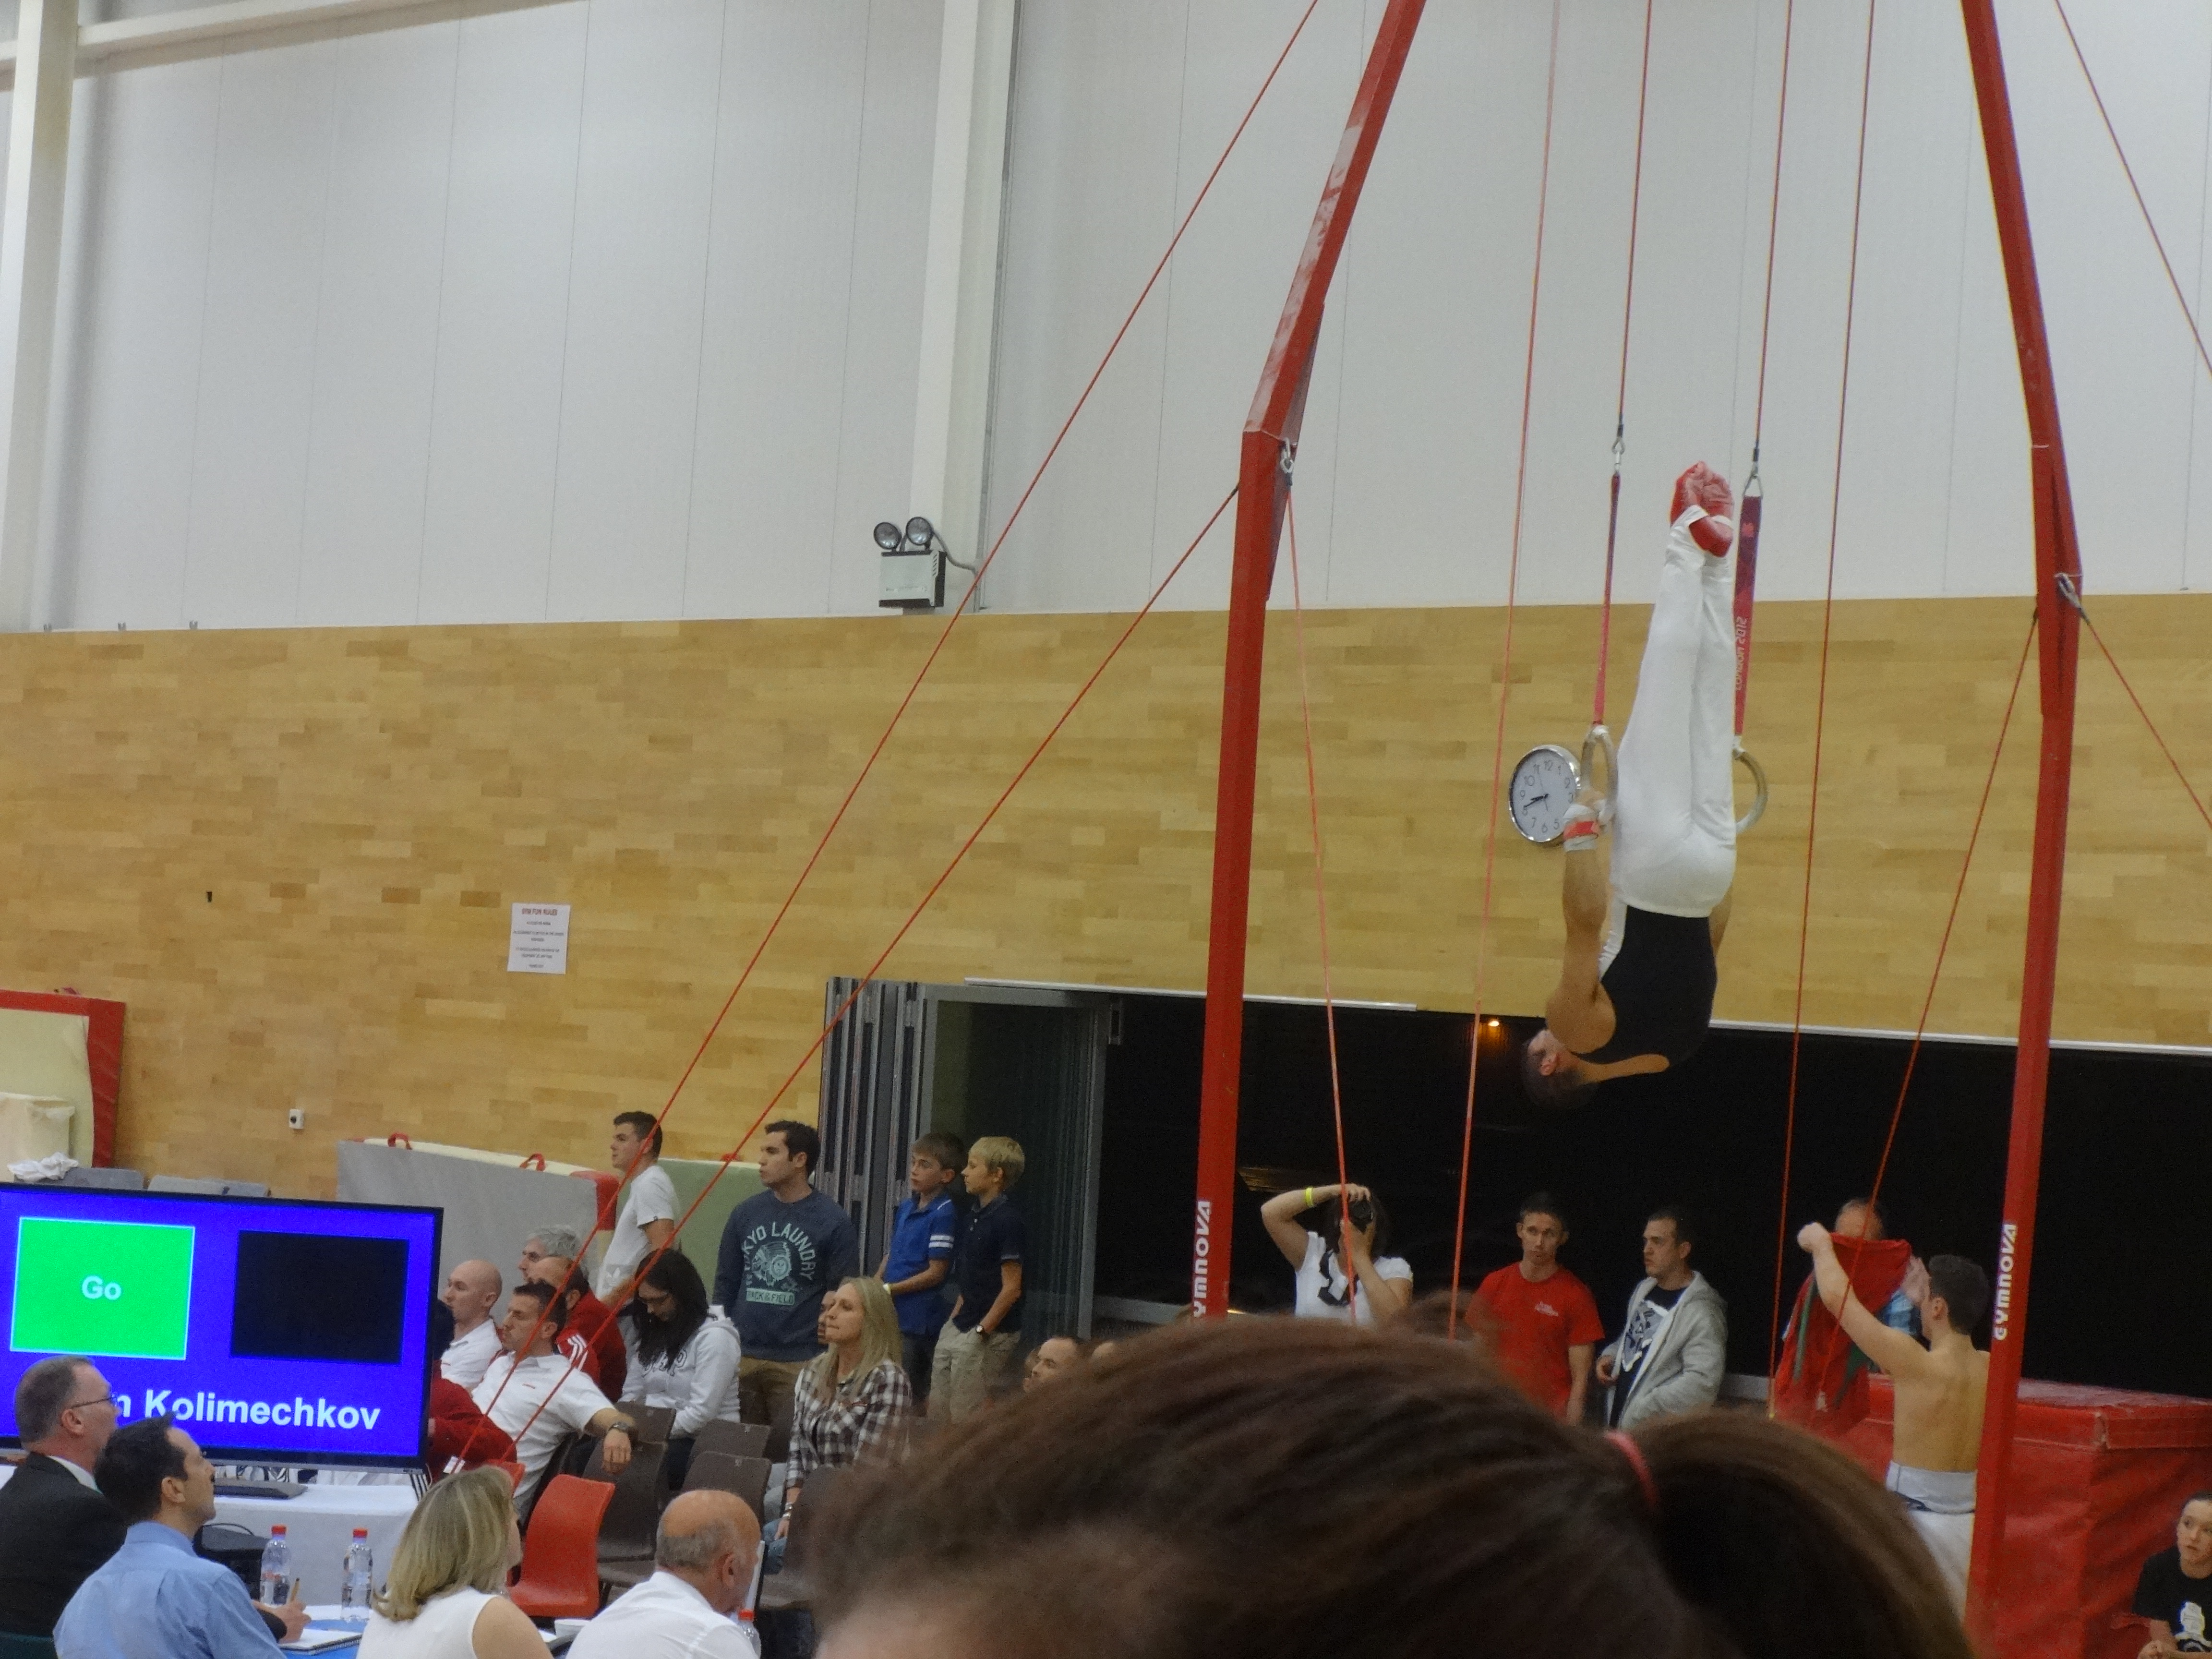 Stef Kolimechkov competed on the Rings at the London Men's Open 2014